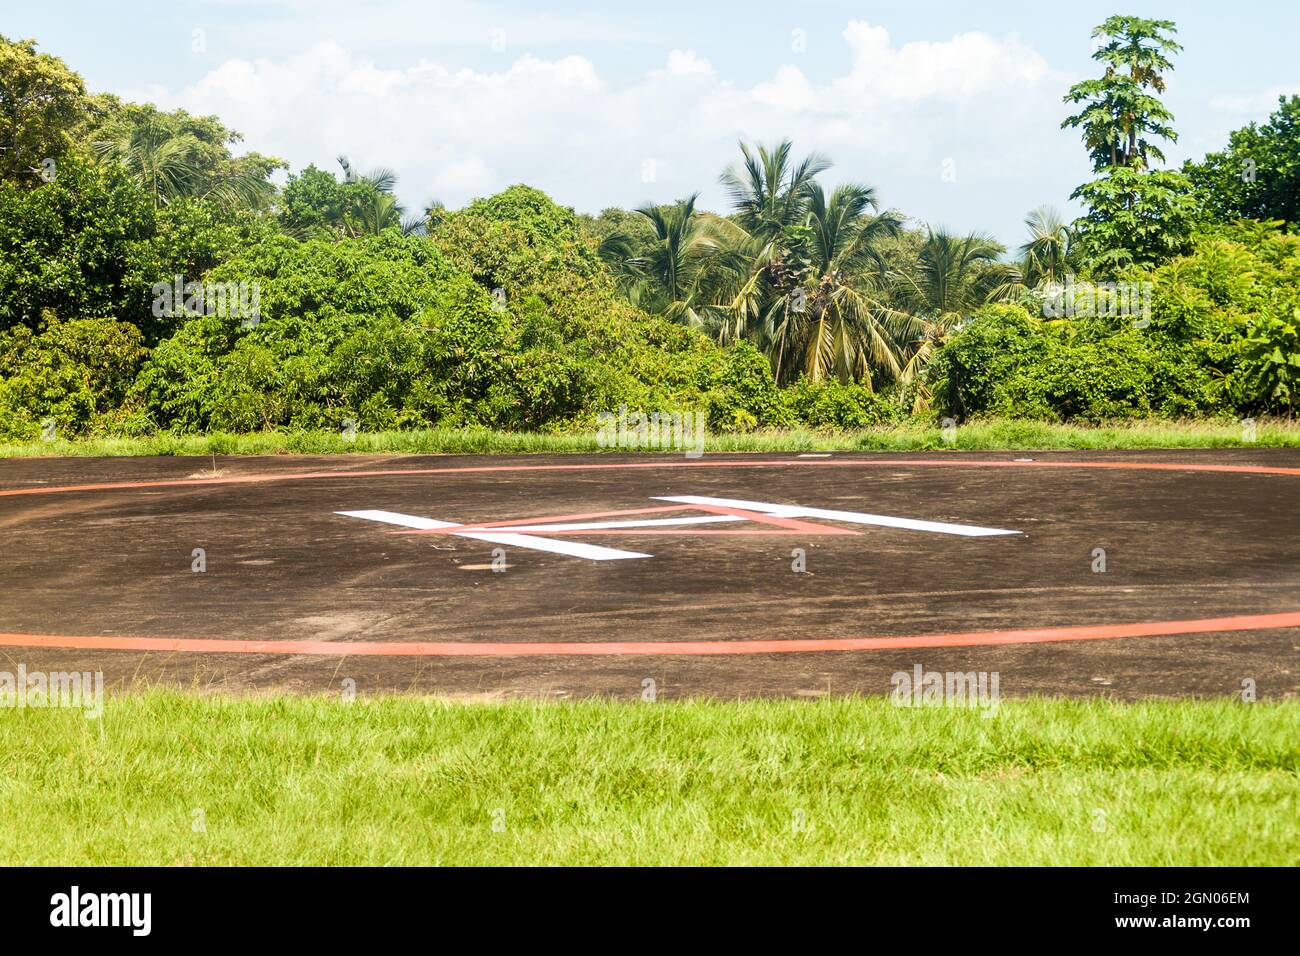 Helipad at Ile Royale, one of the islands of Iles du Salut (Islands of Salvation) in French Guiana Stock Photo